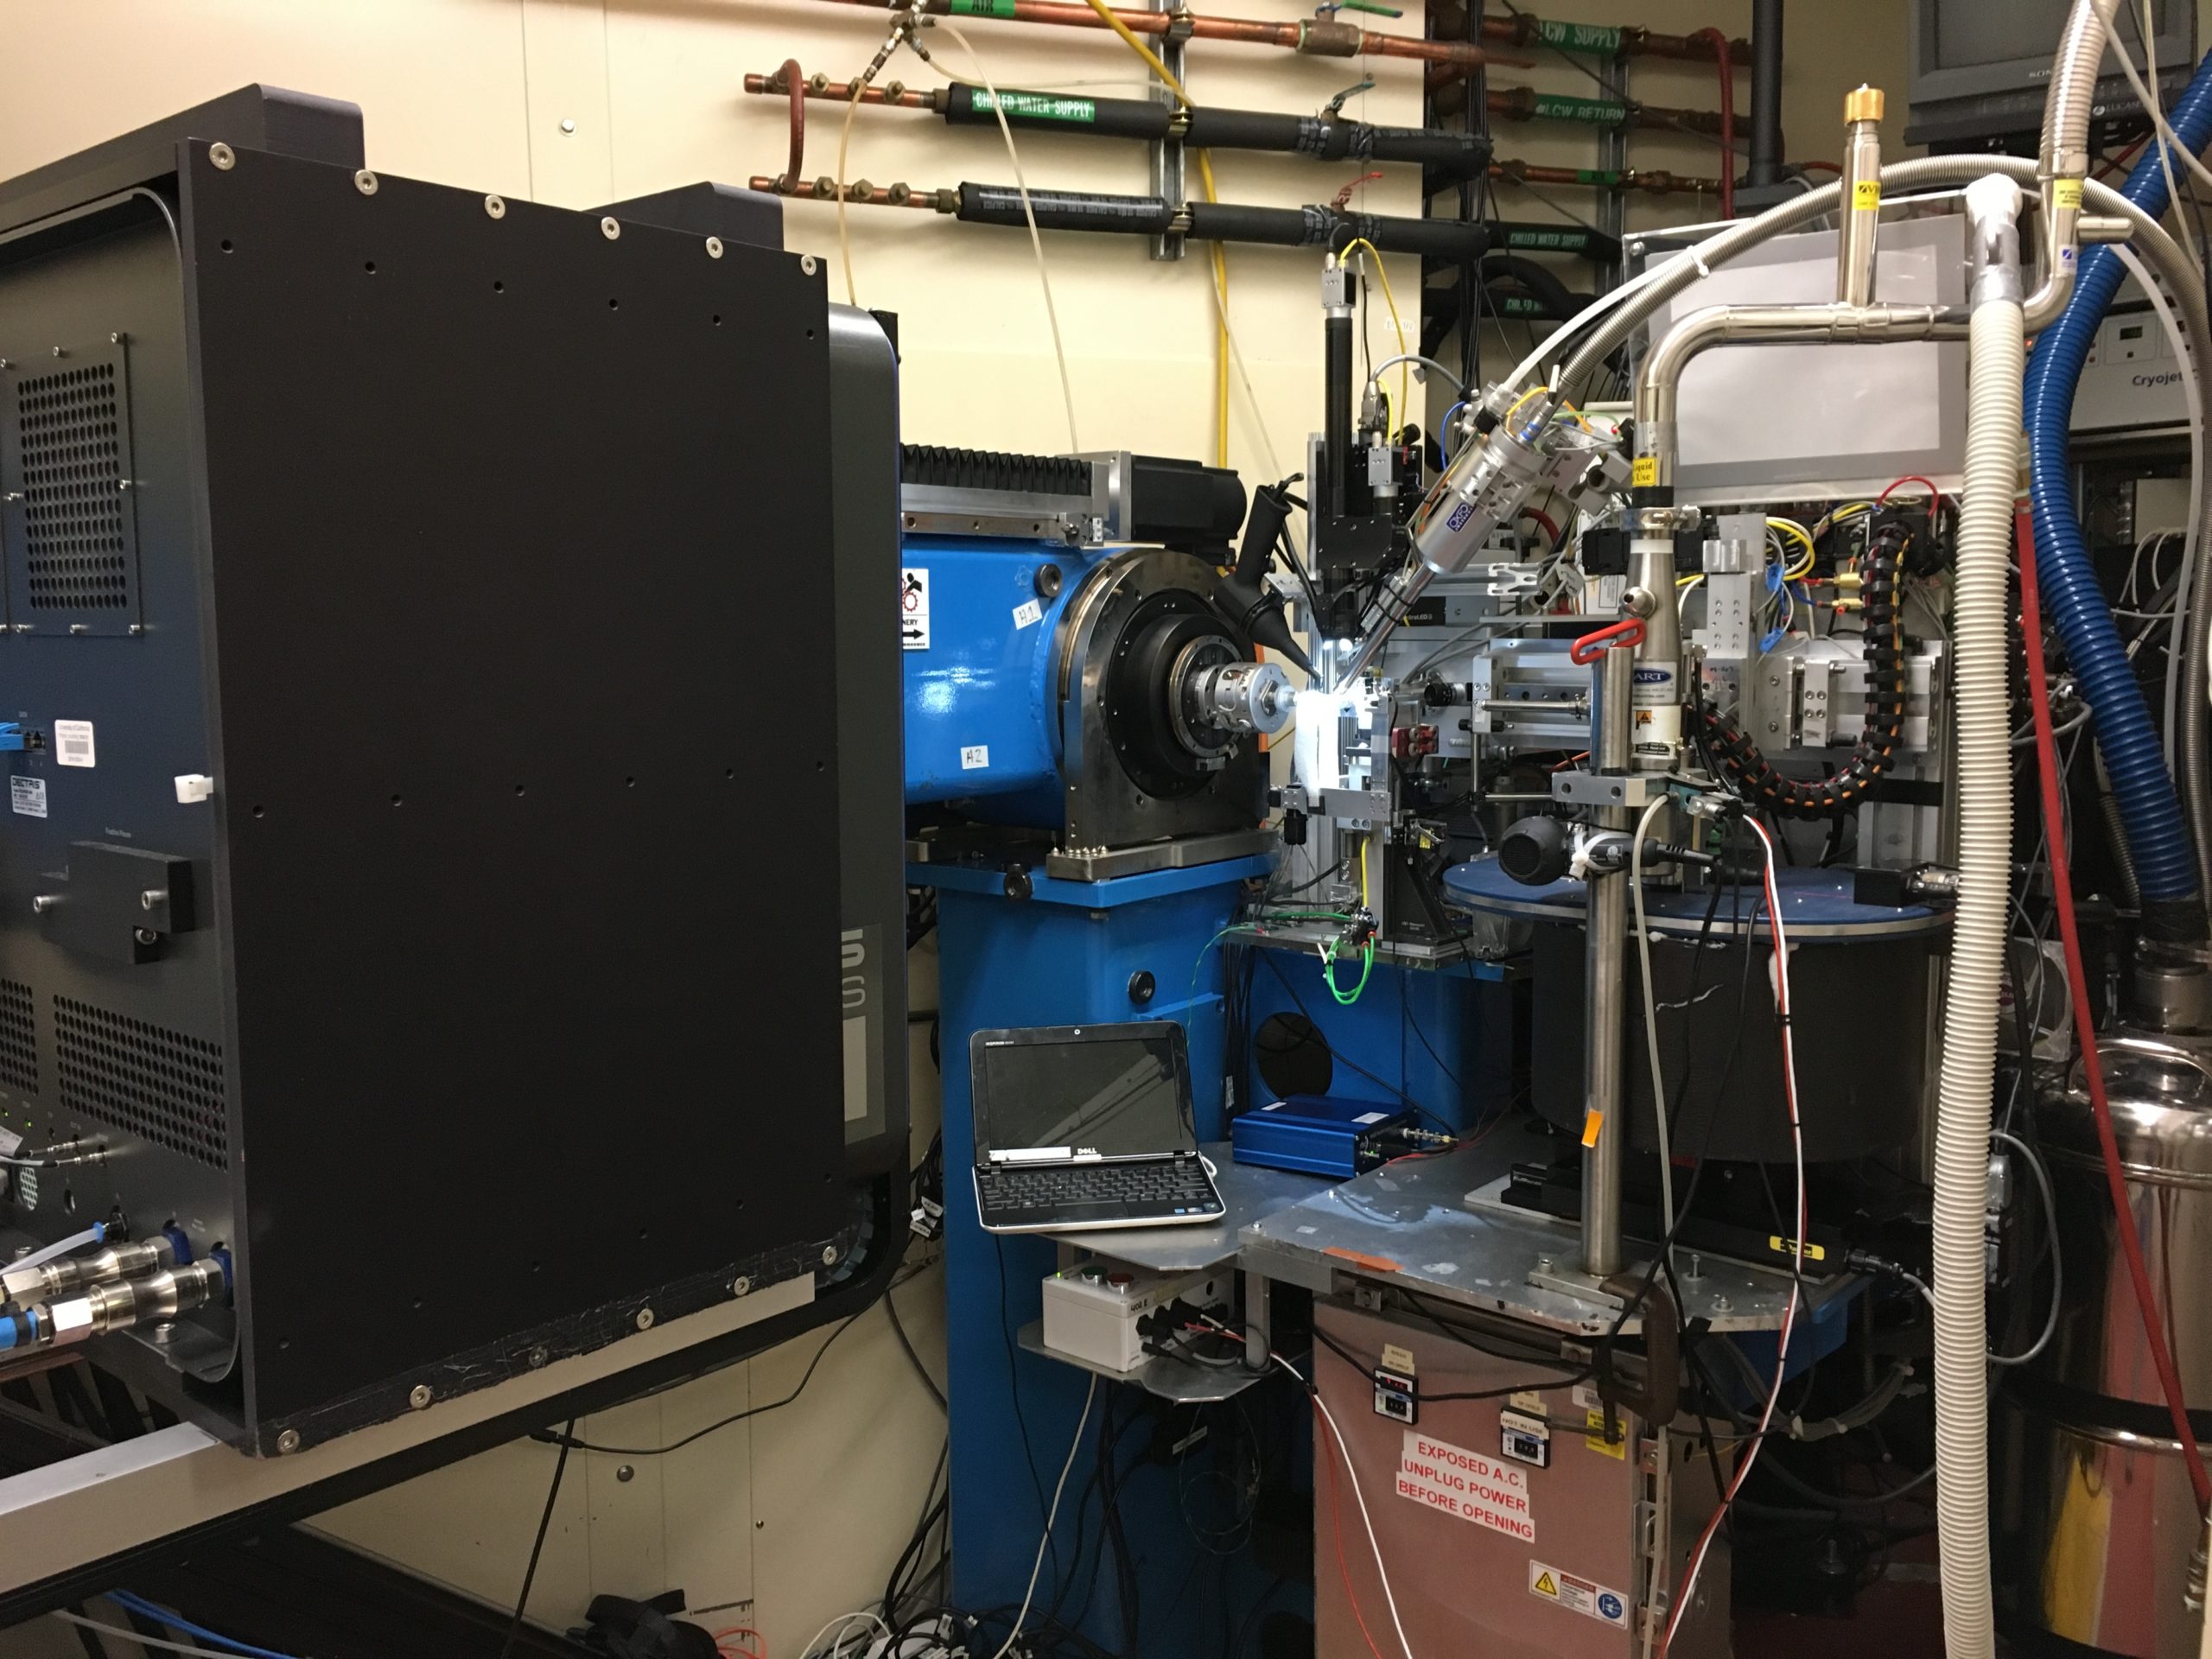 Photo - ALS Beamline 5.0.1, pictured here, is one of the beamlines that has been enlisted for COVID-19-related experiments. (Credit: Berkeley Lab) 